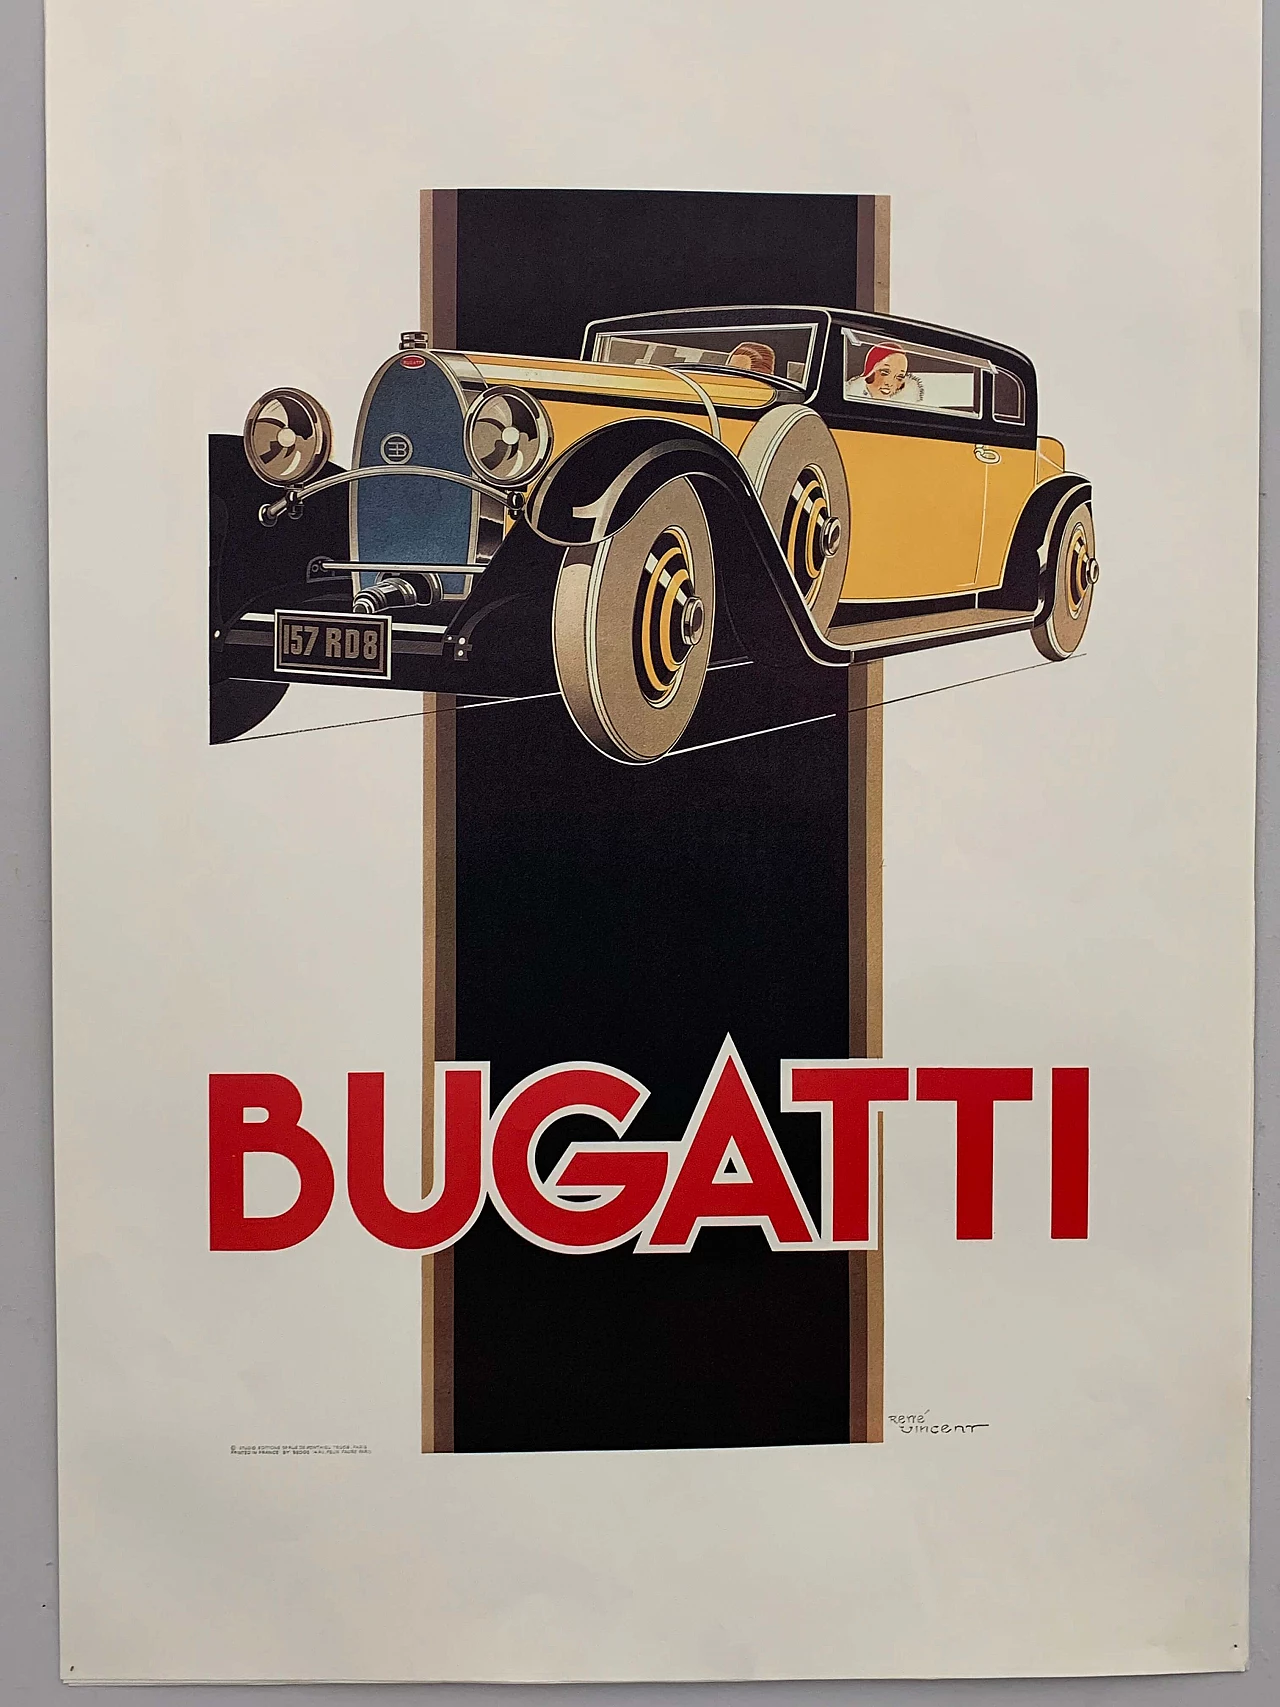 Bugatti Poster by Rene Vincent for Bedos Paris, 1960s 1106408